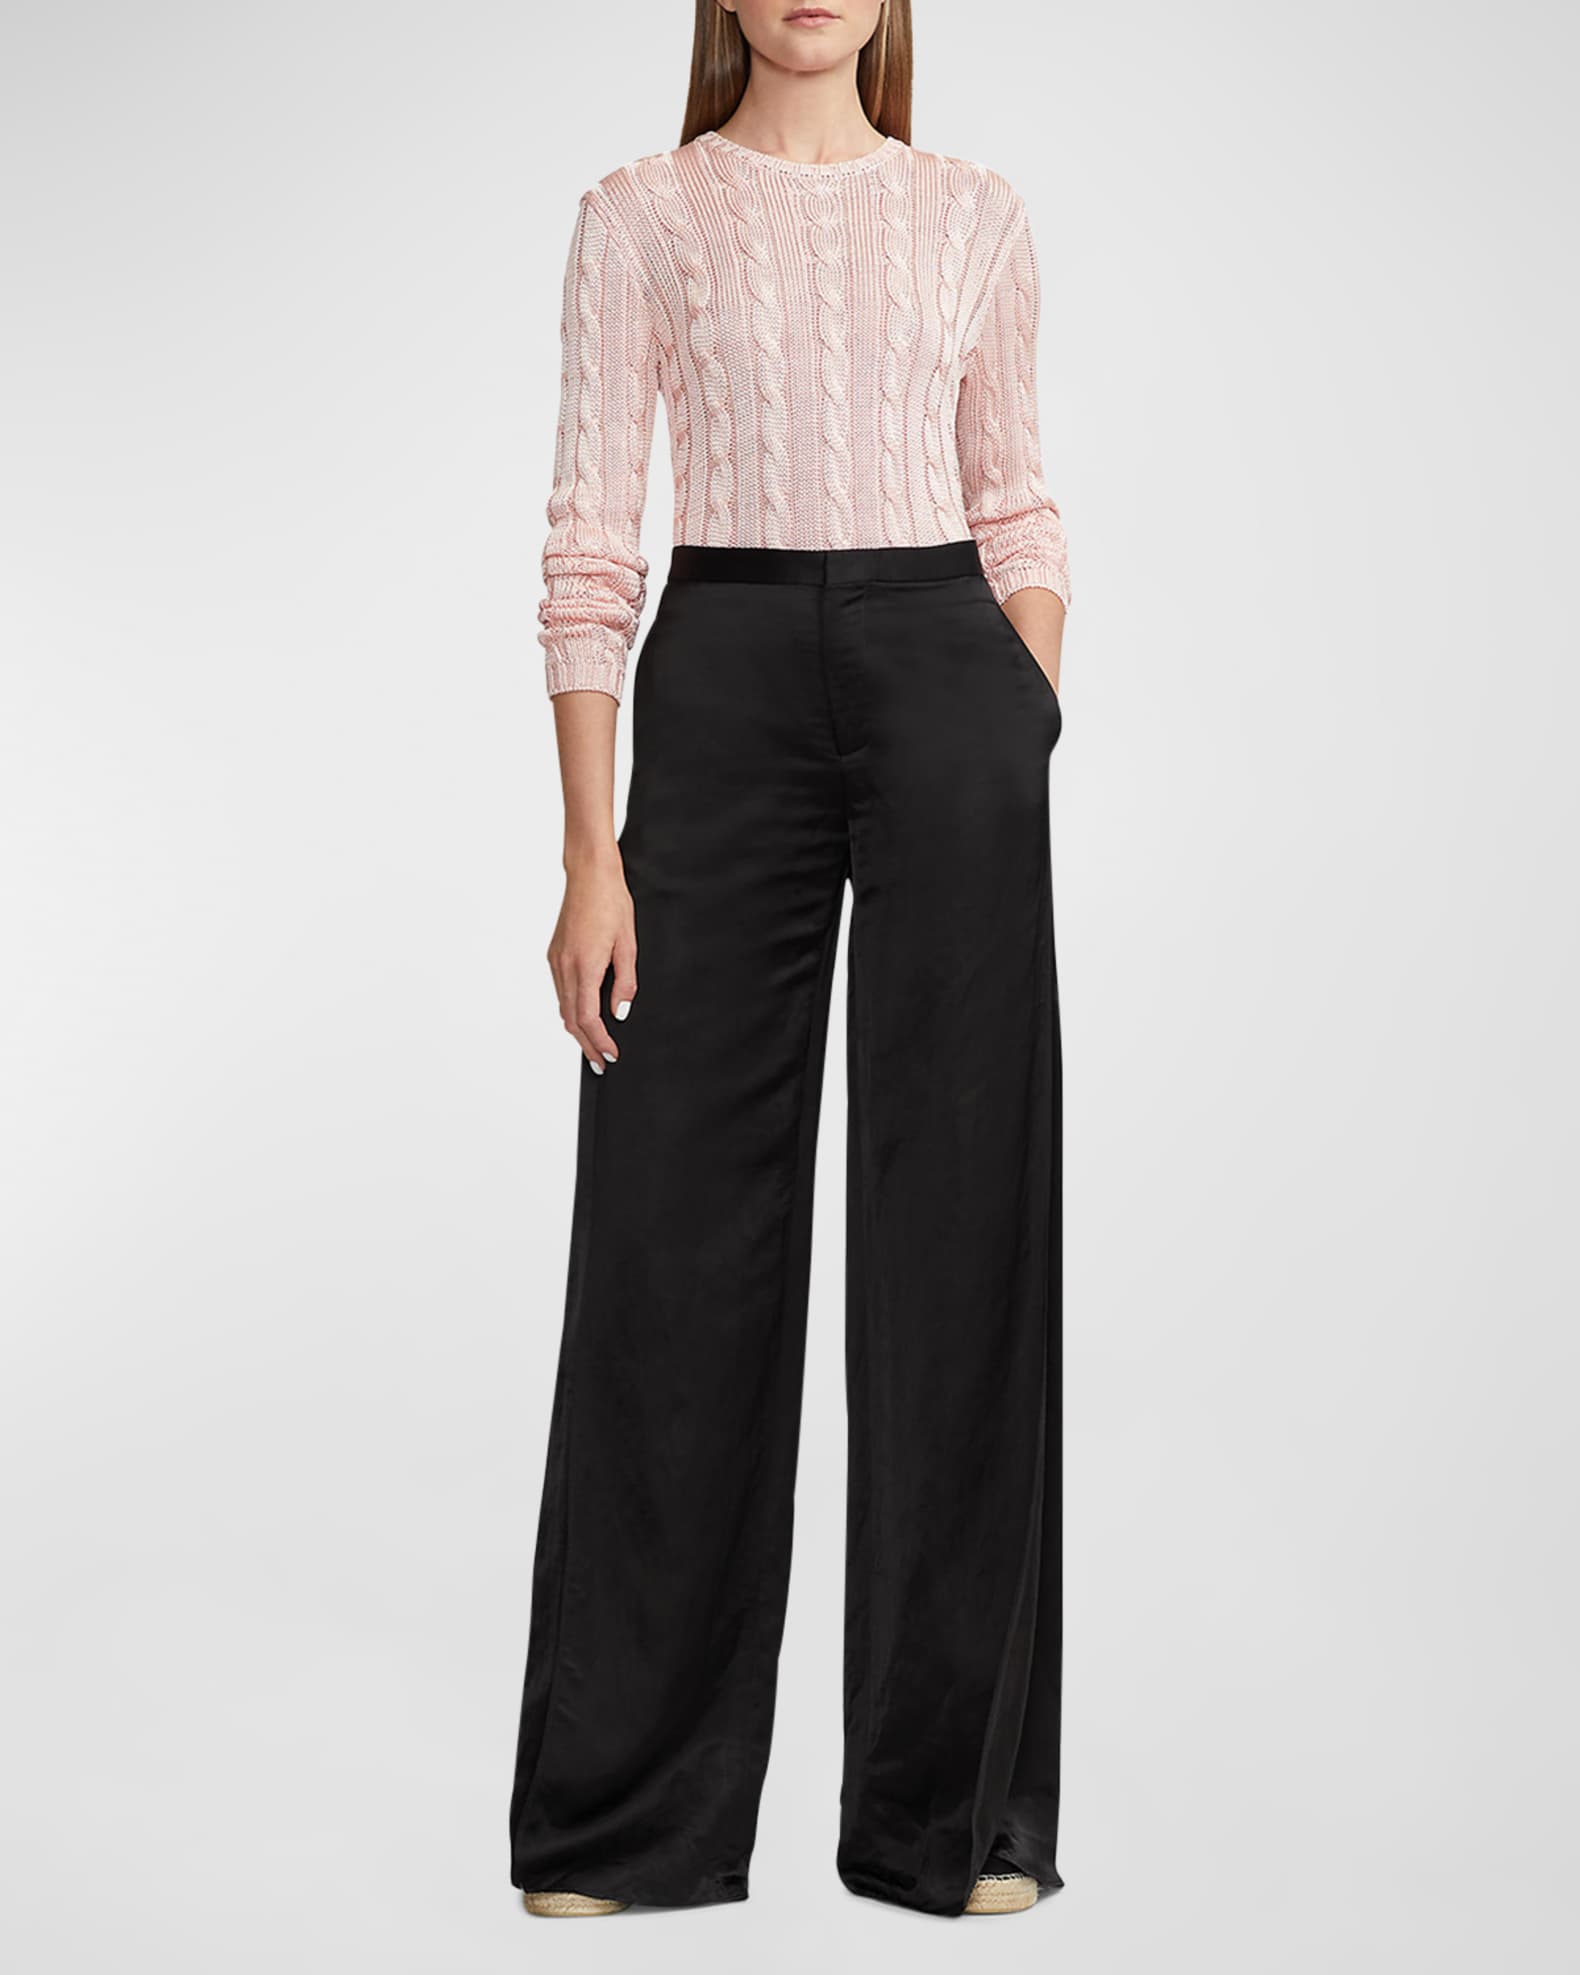 Ralph Lauren Collection Cable High-Shine Silk Sweater, Pink | Neiman Marcus